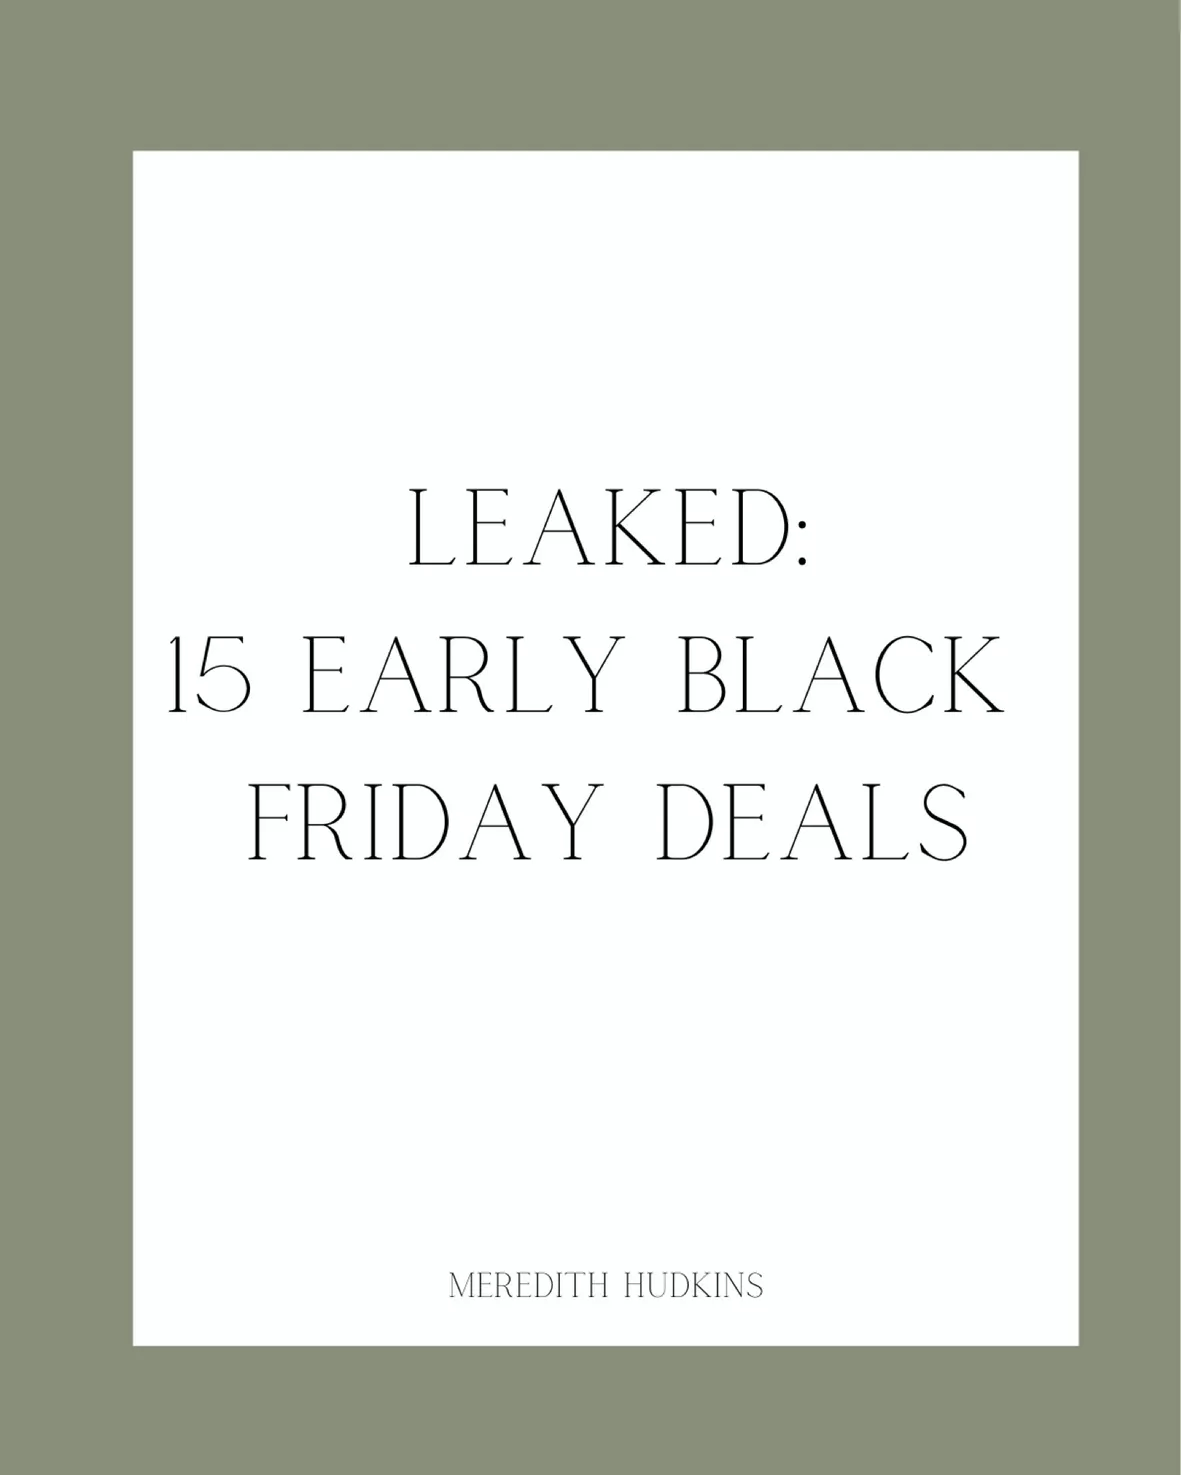 Black Friday Deals - Best Fashion, Beauty, and Home Sales